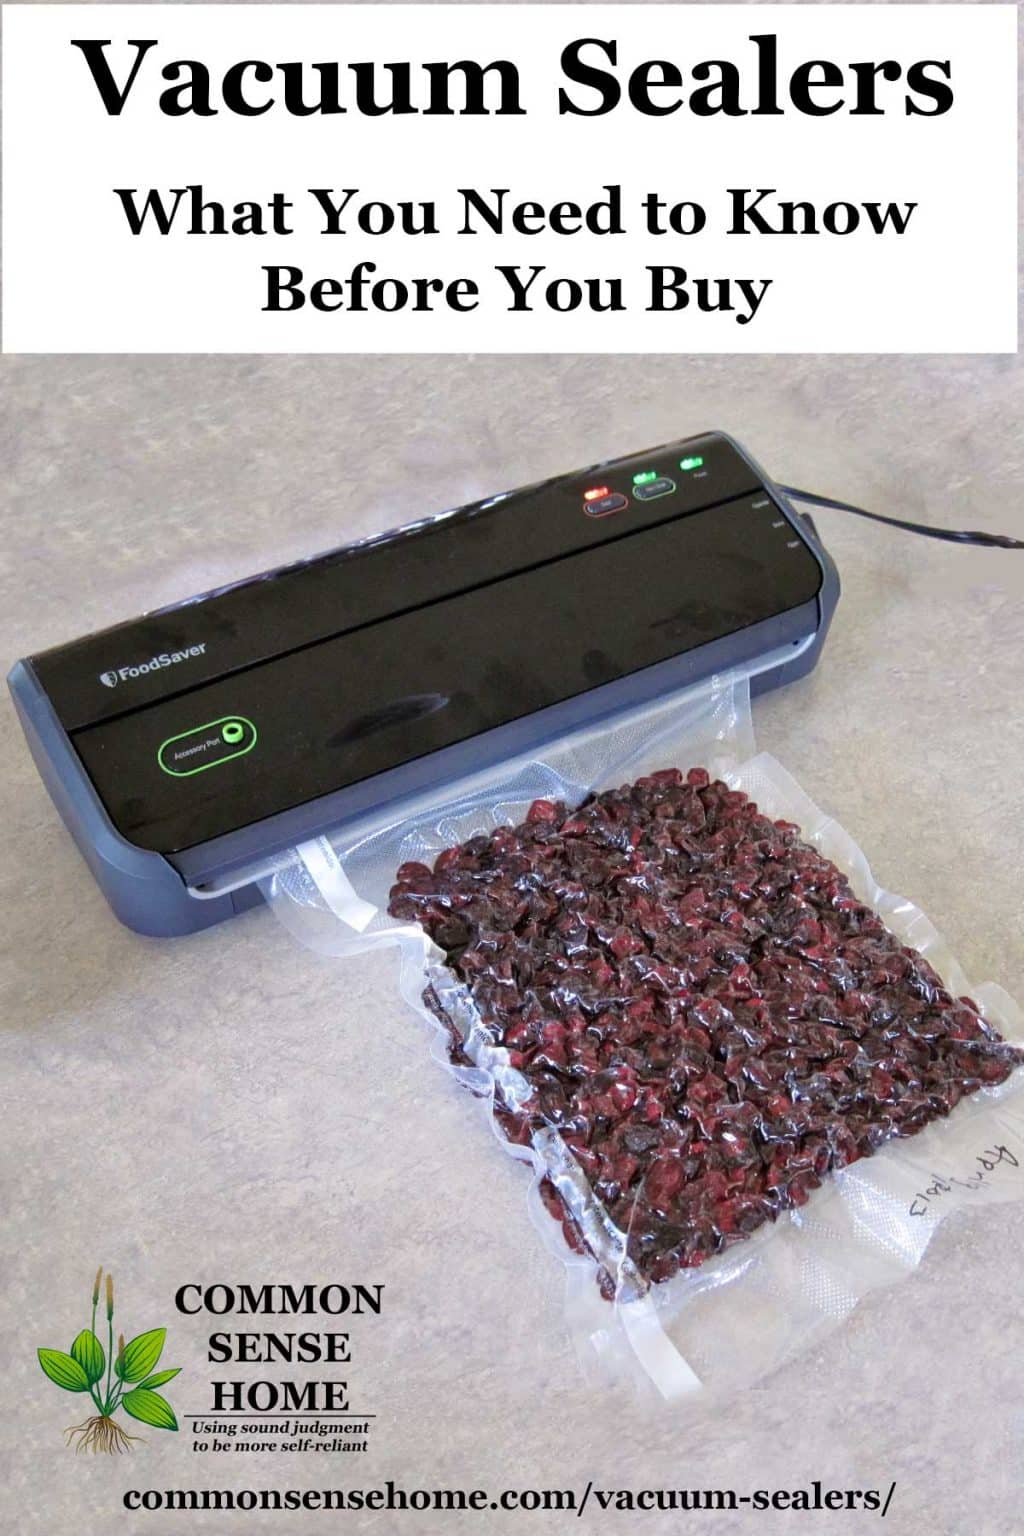 Vacuum Sealers - What You Need to Know Before You Buy